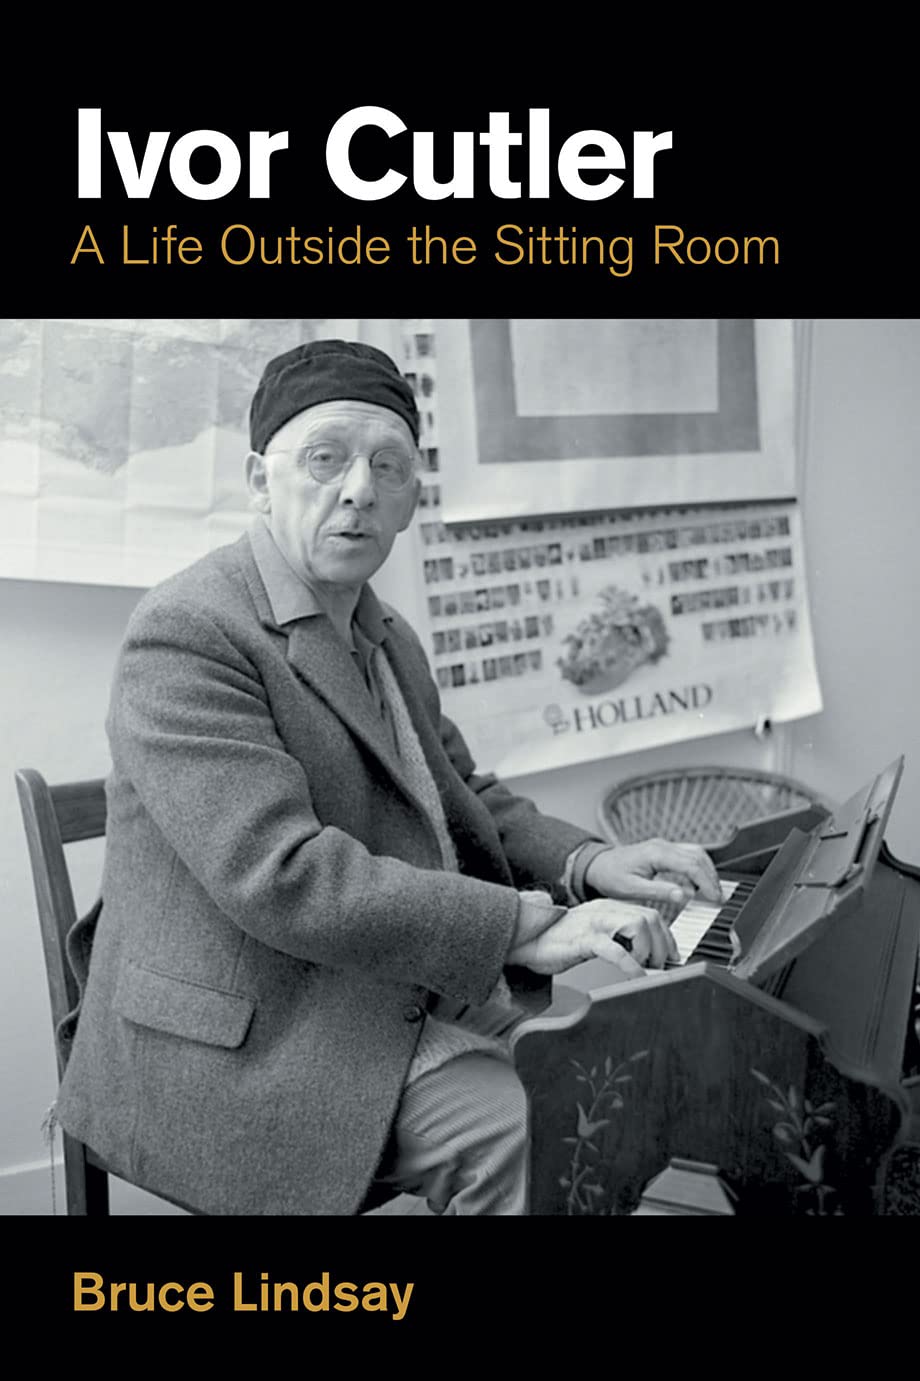 Ivor Cutler a life outside the sitting room book cover